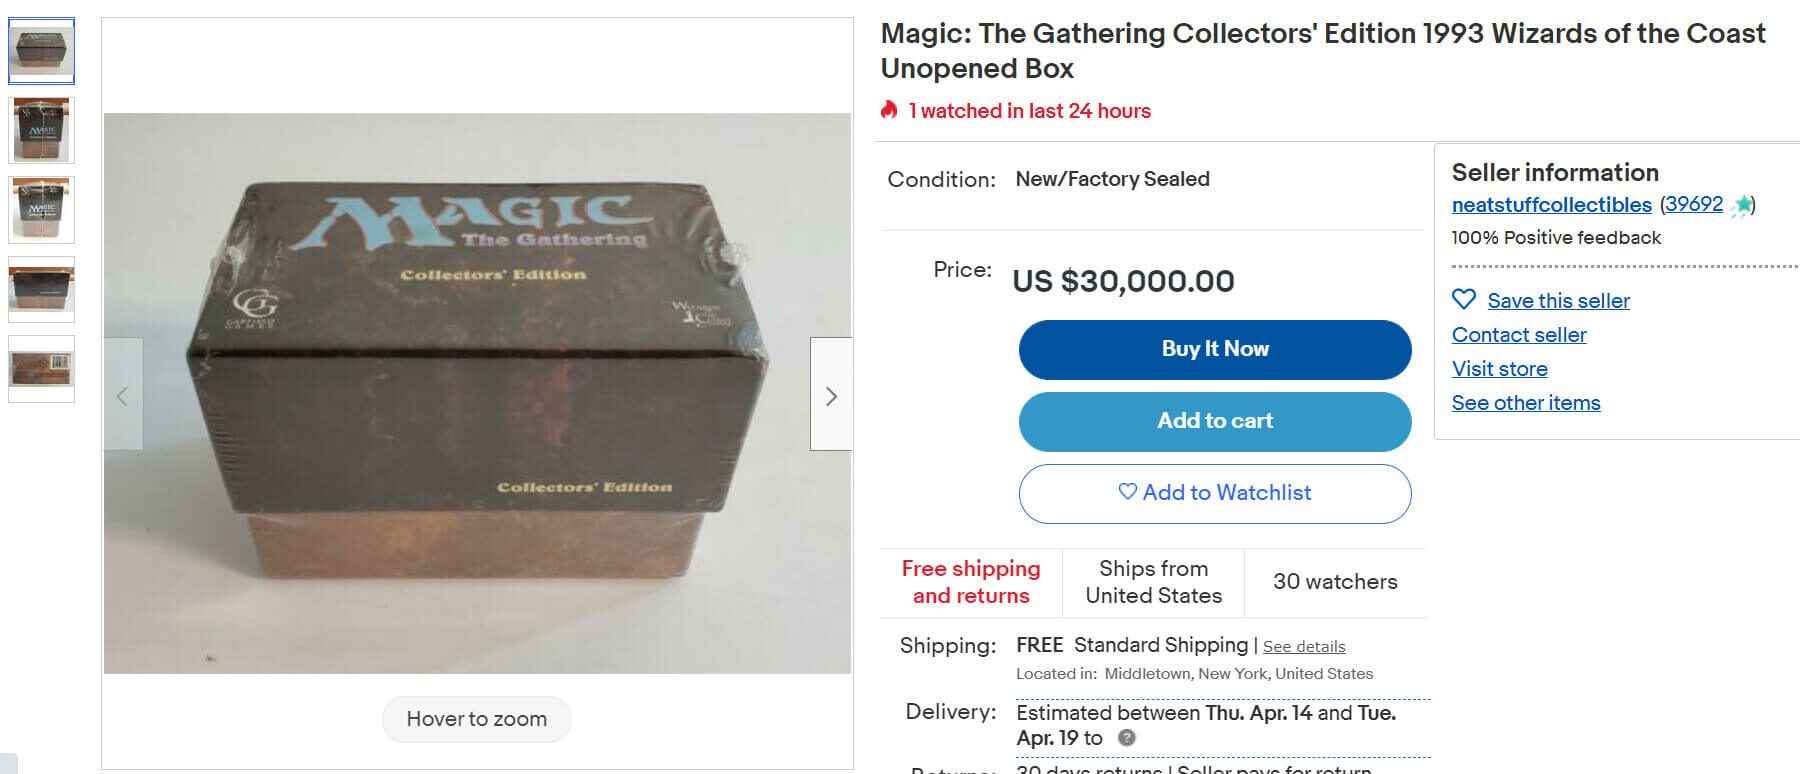 Rare "Magic: The Gathering" Unopened Collectors' Edition For Sale!